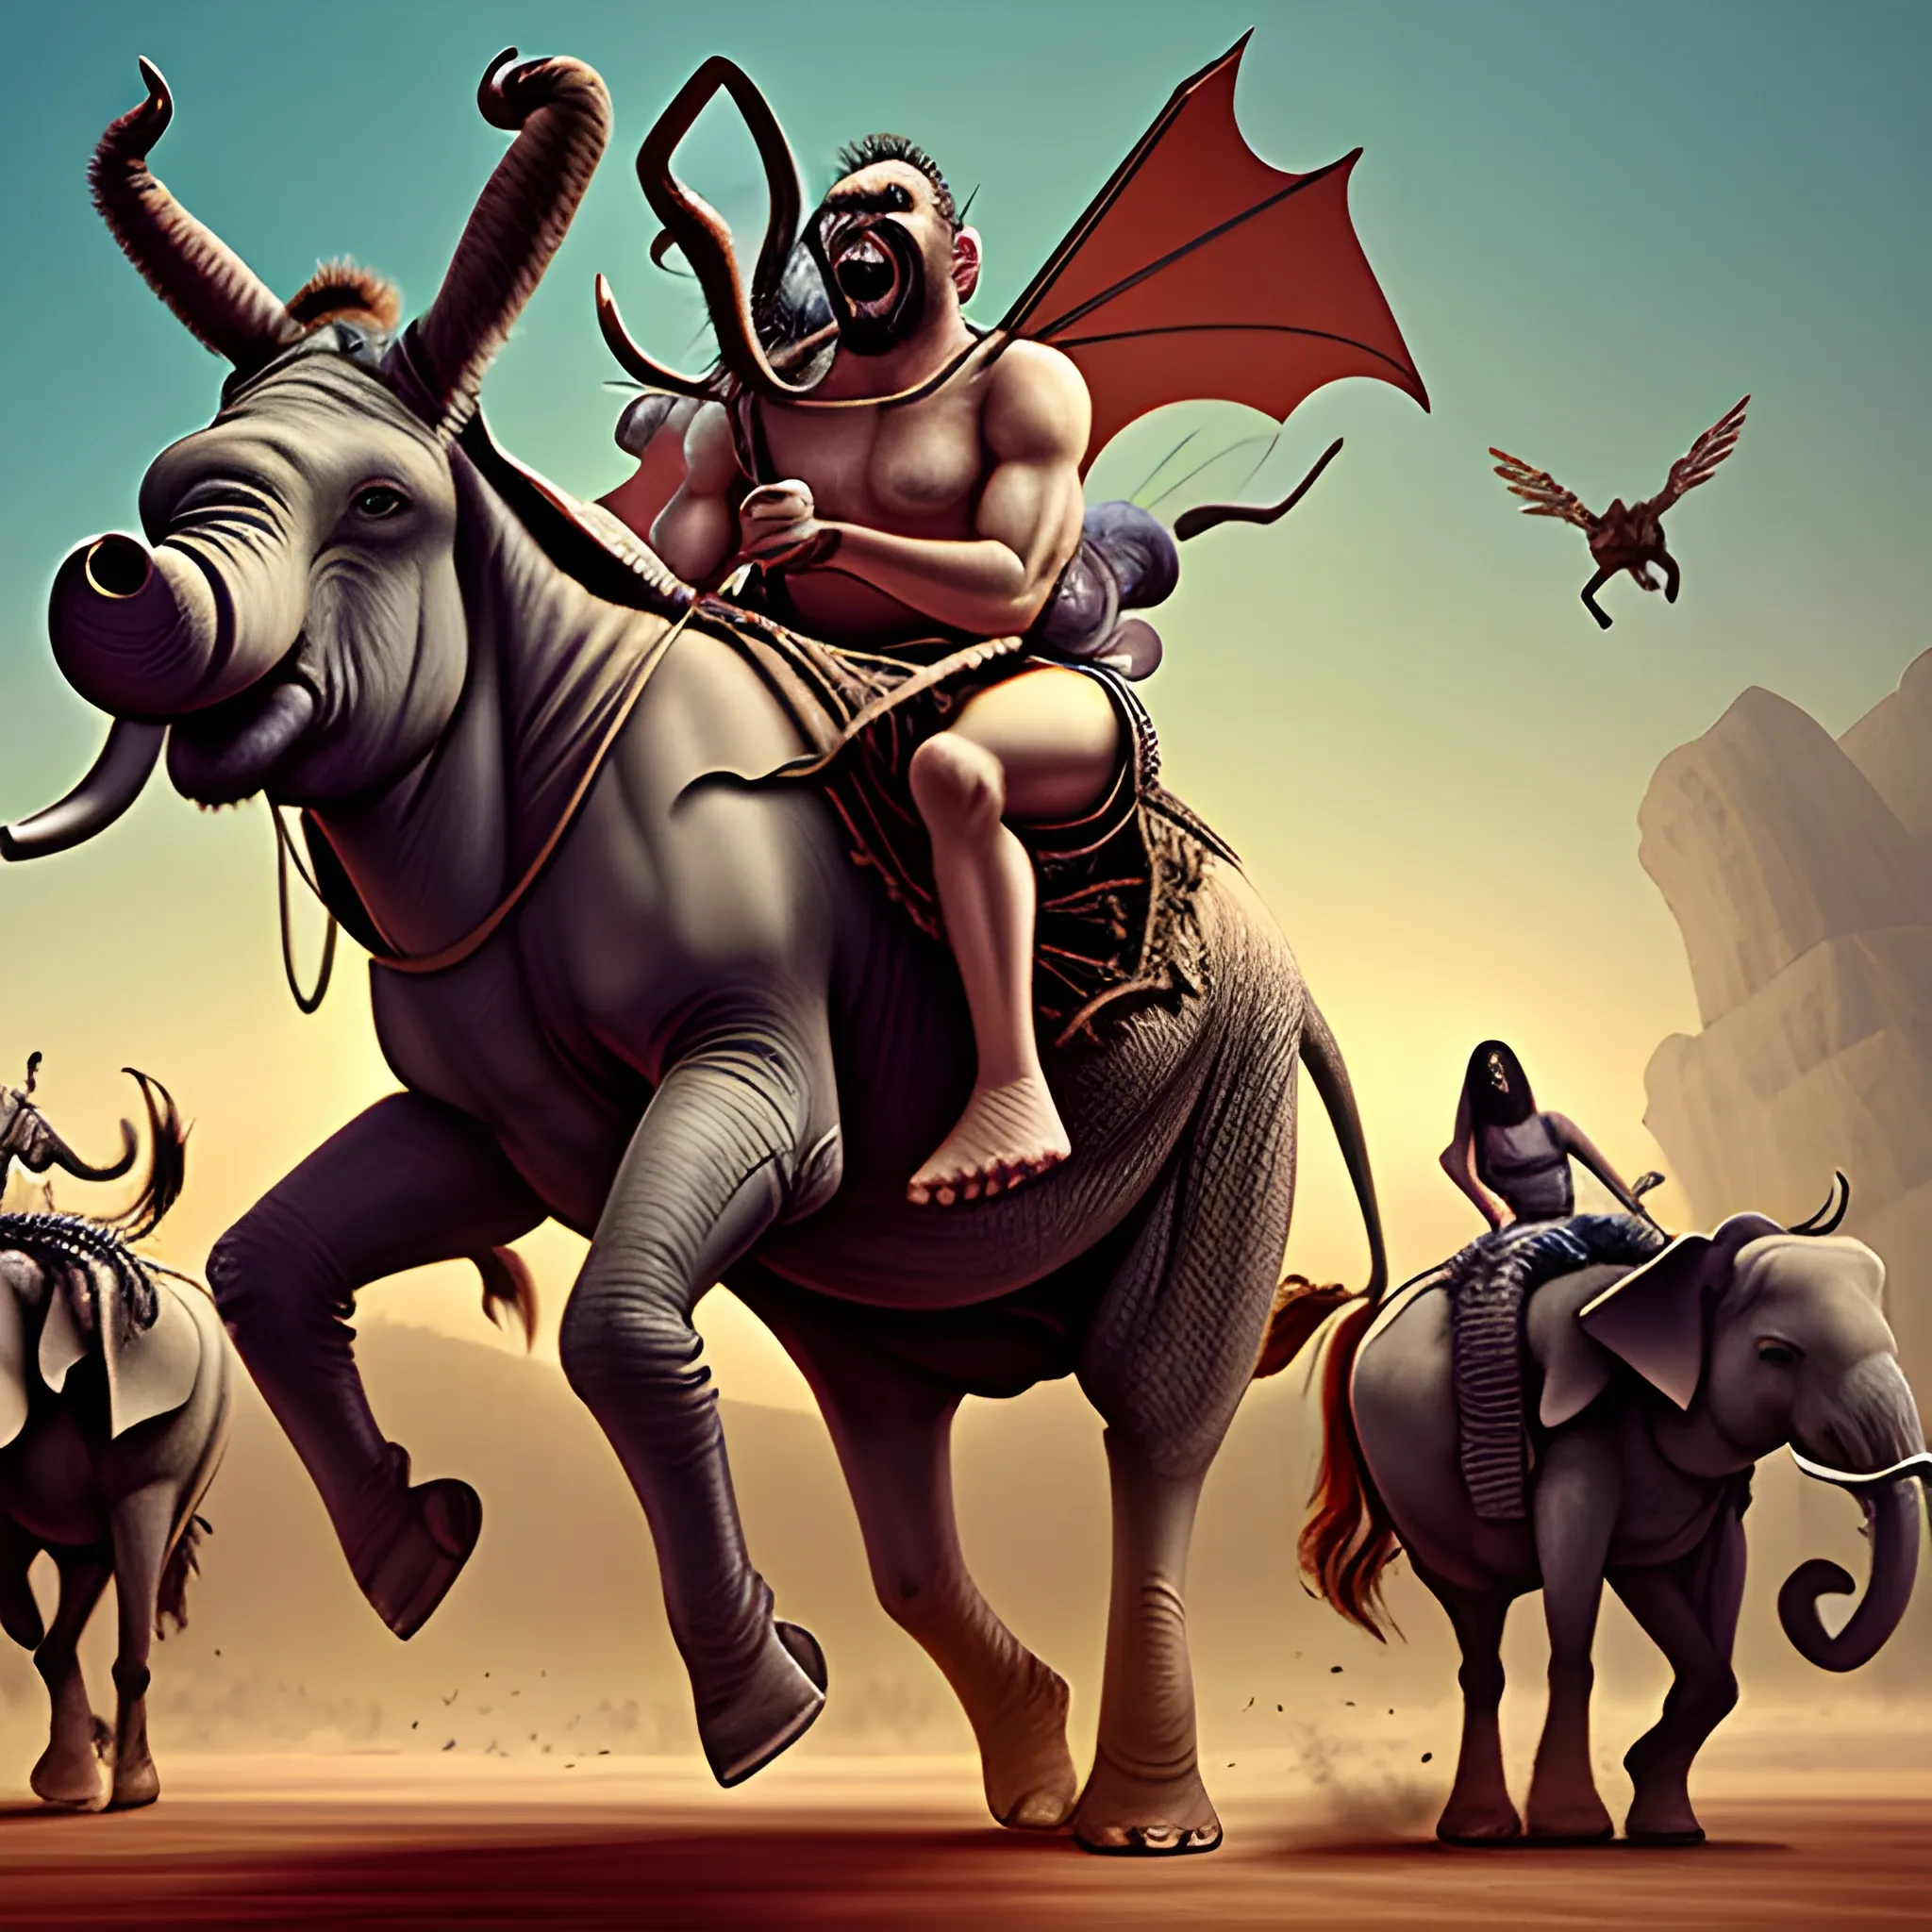 A giant angry looking donkey and angry looking elephant galloping together into hell, with a bunch of people riding on their backs., Cartoon